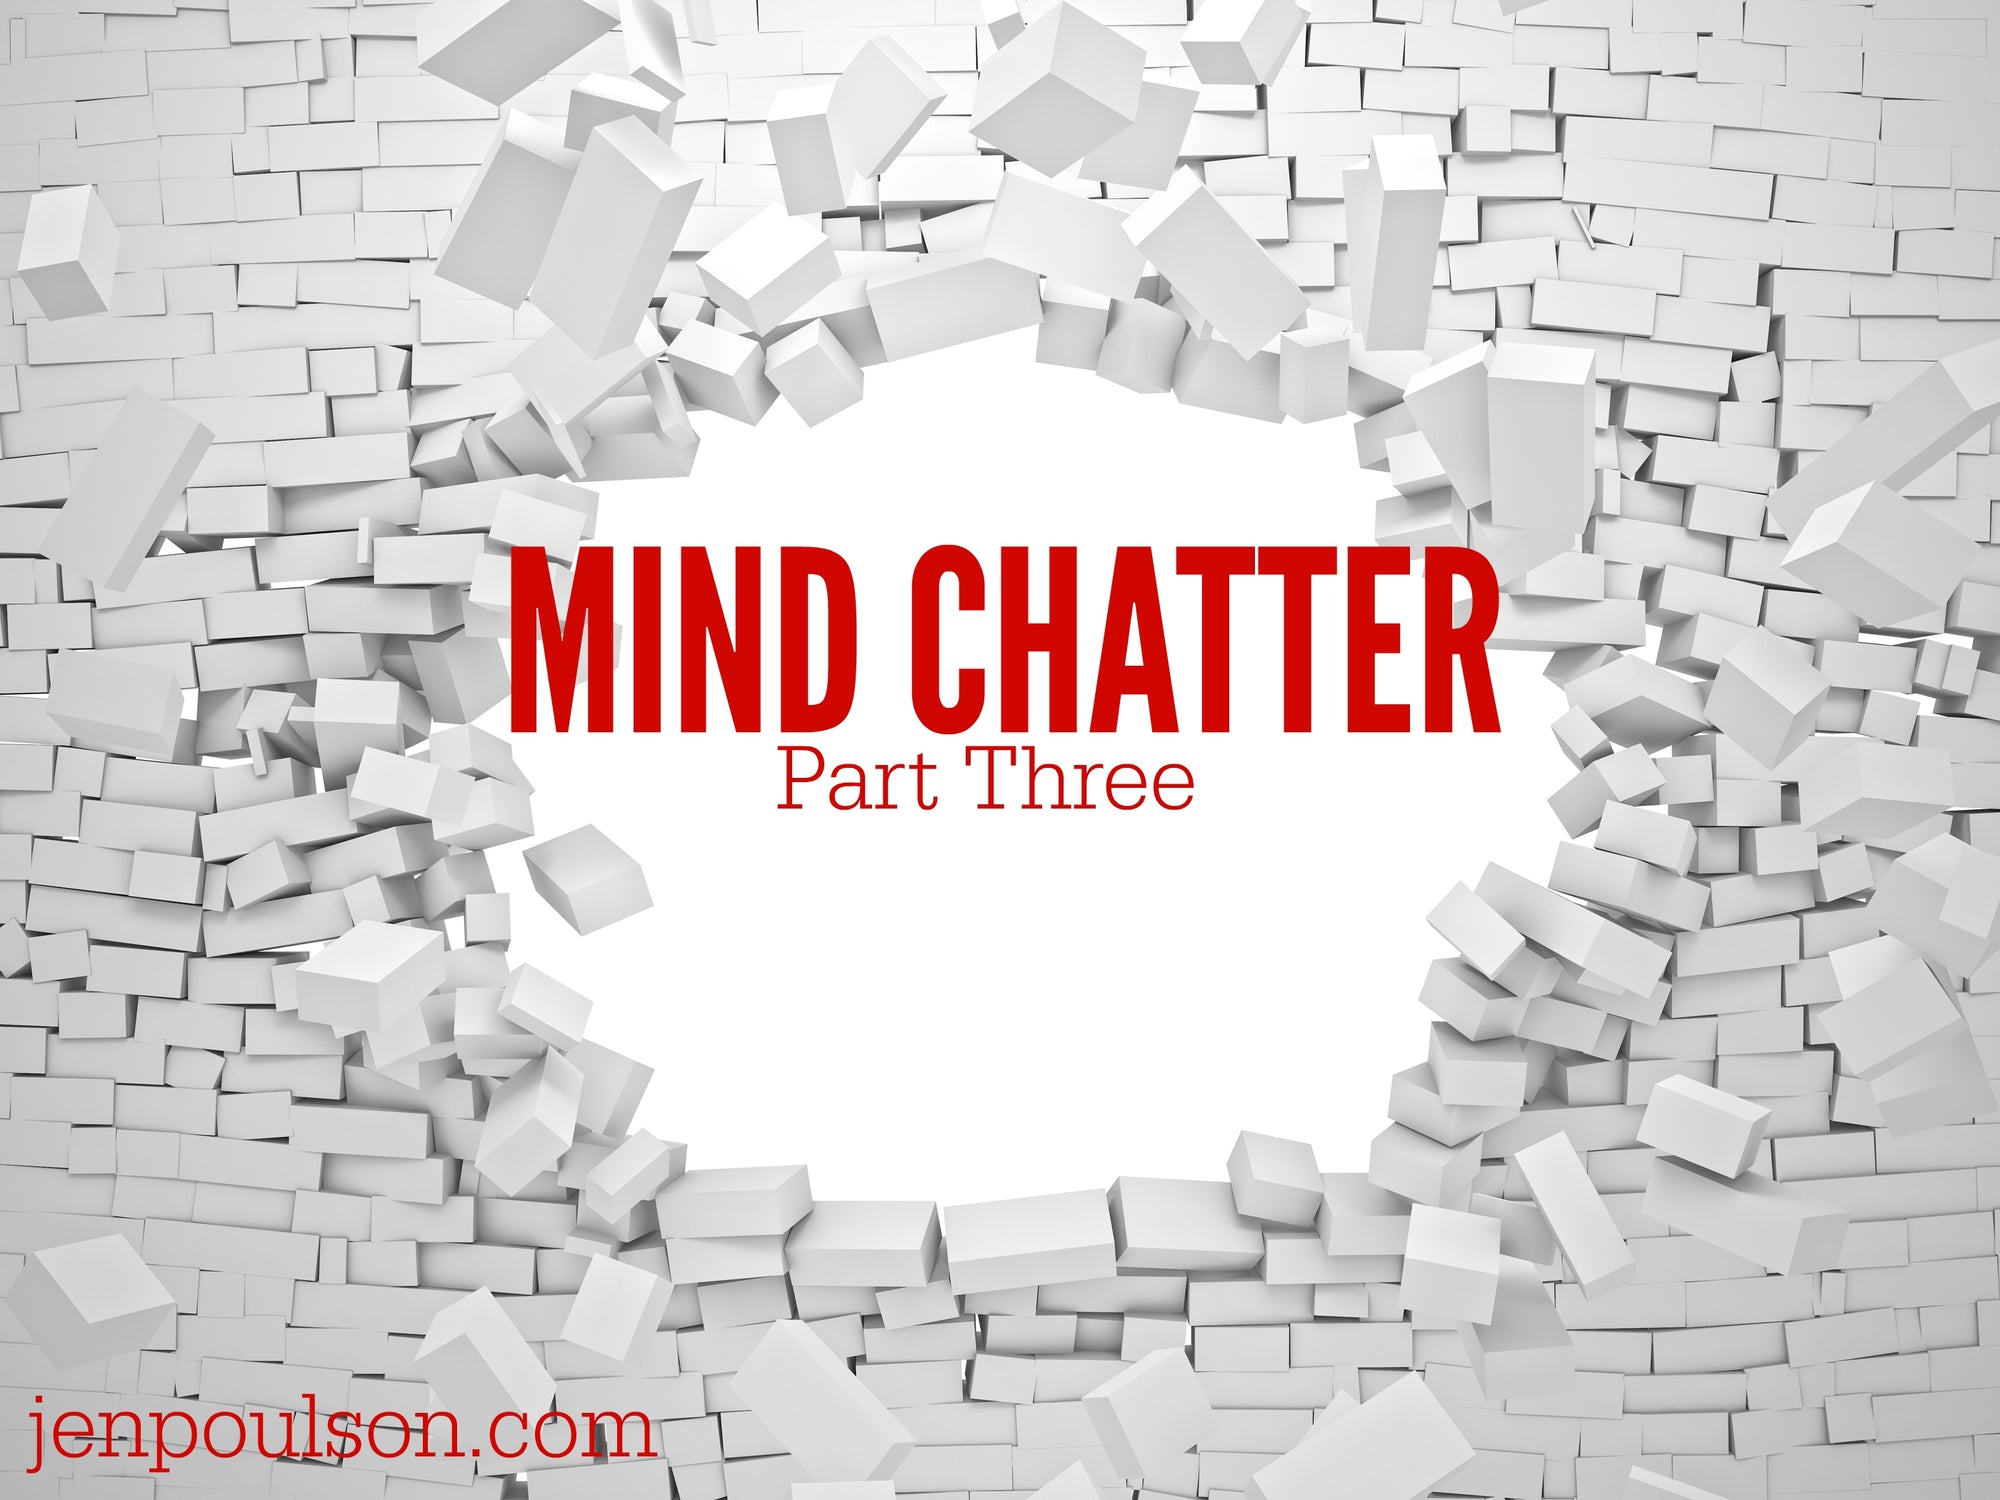 Mind Chatter - 3 Simple Steps to Clean it Up! (Part 3)